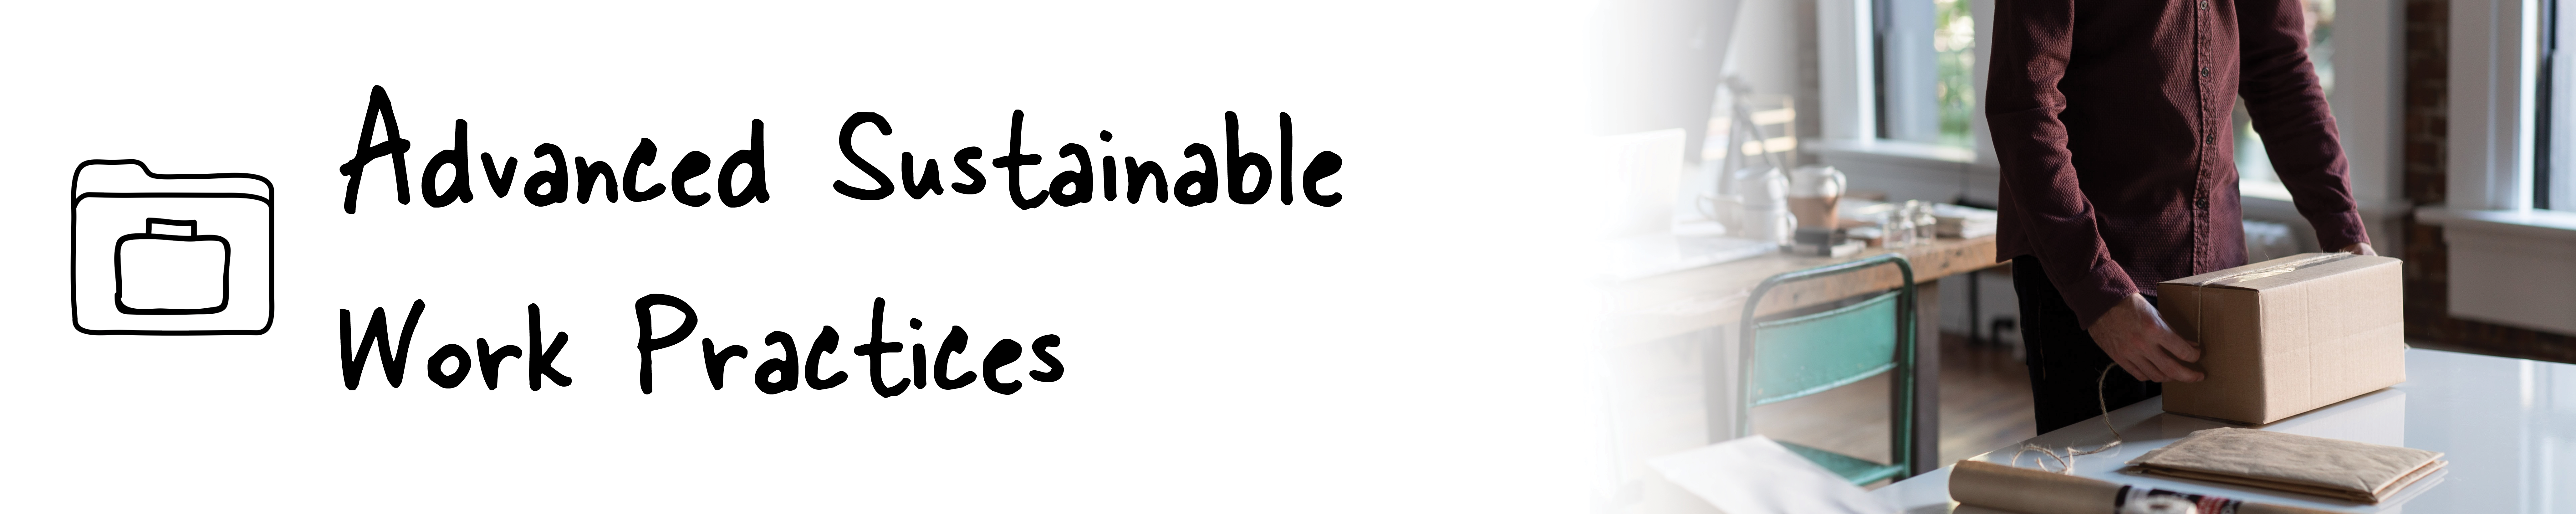 Advanced Sustainable Work Practices